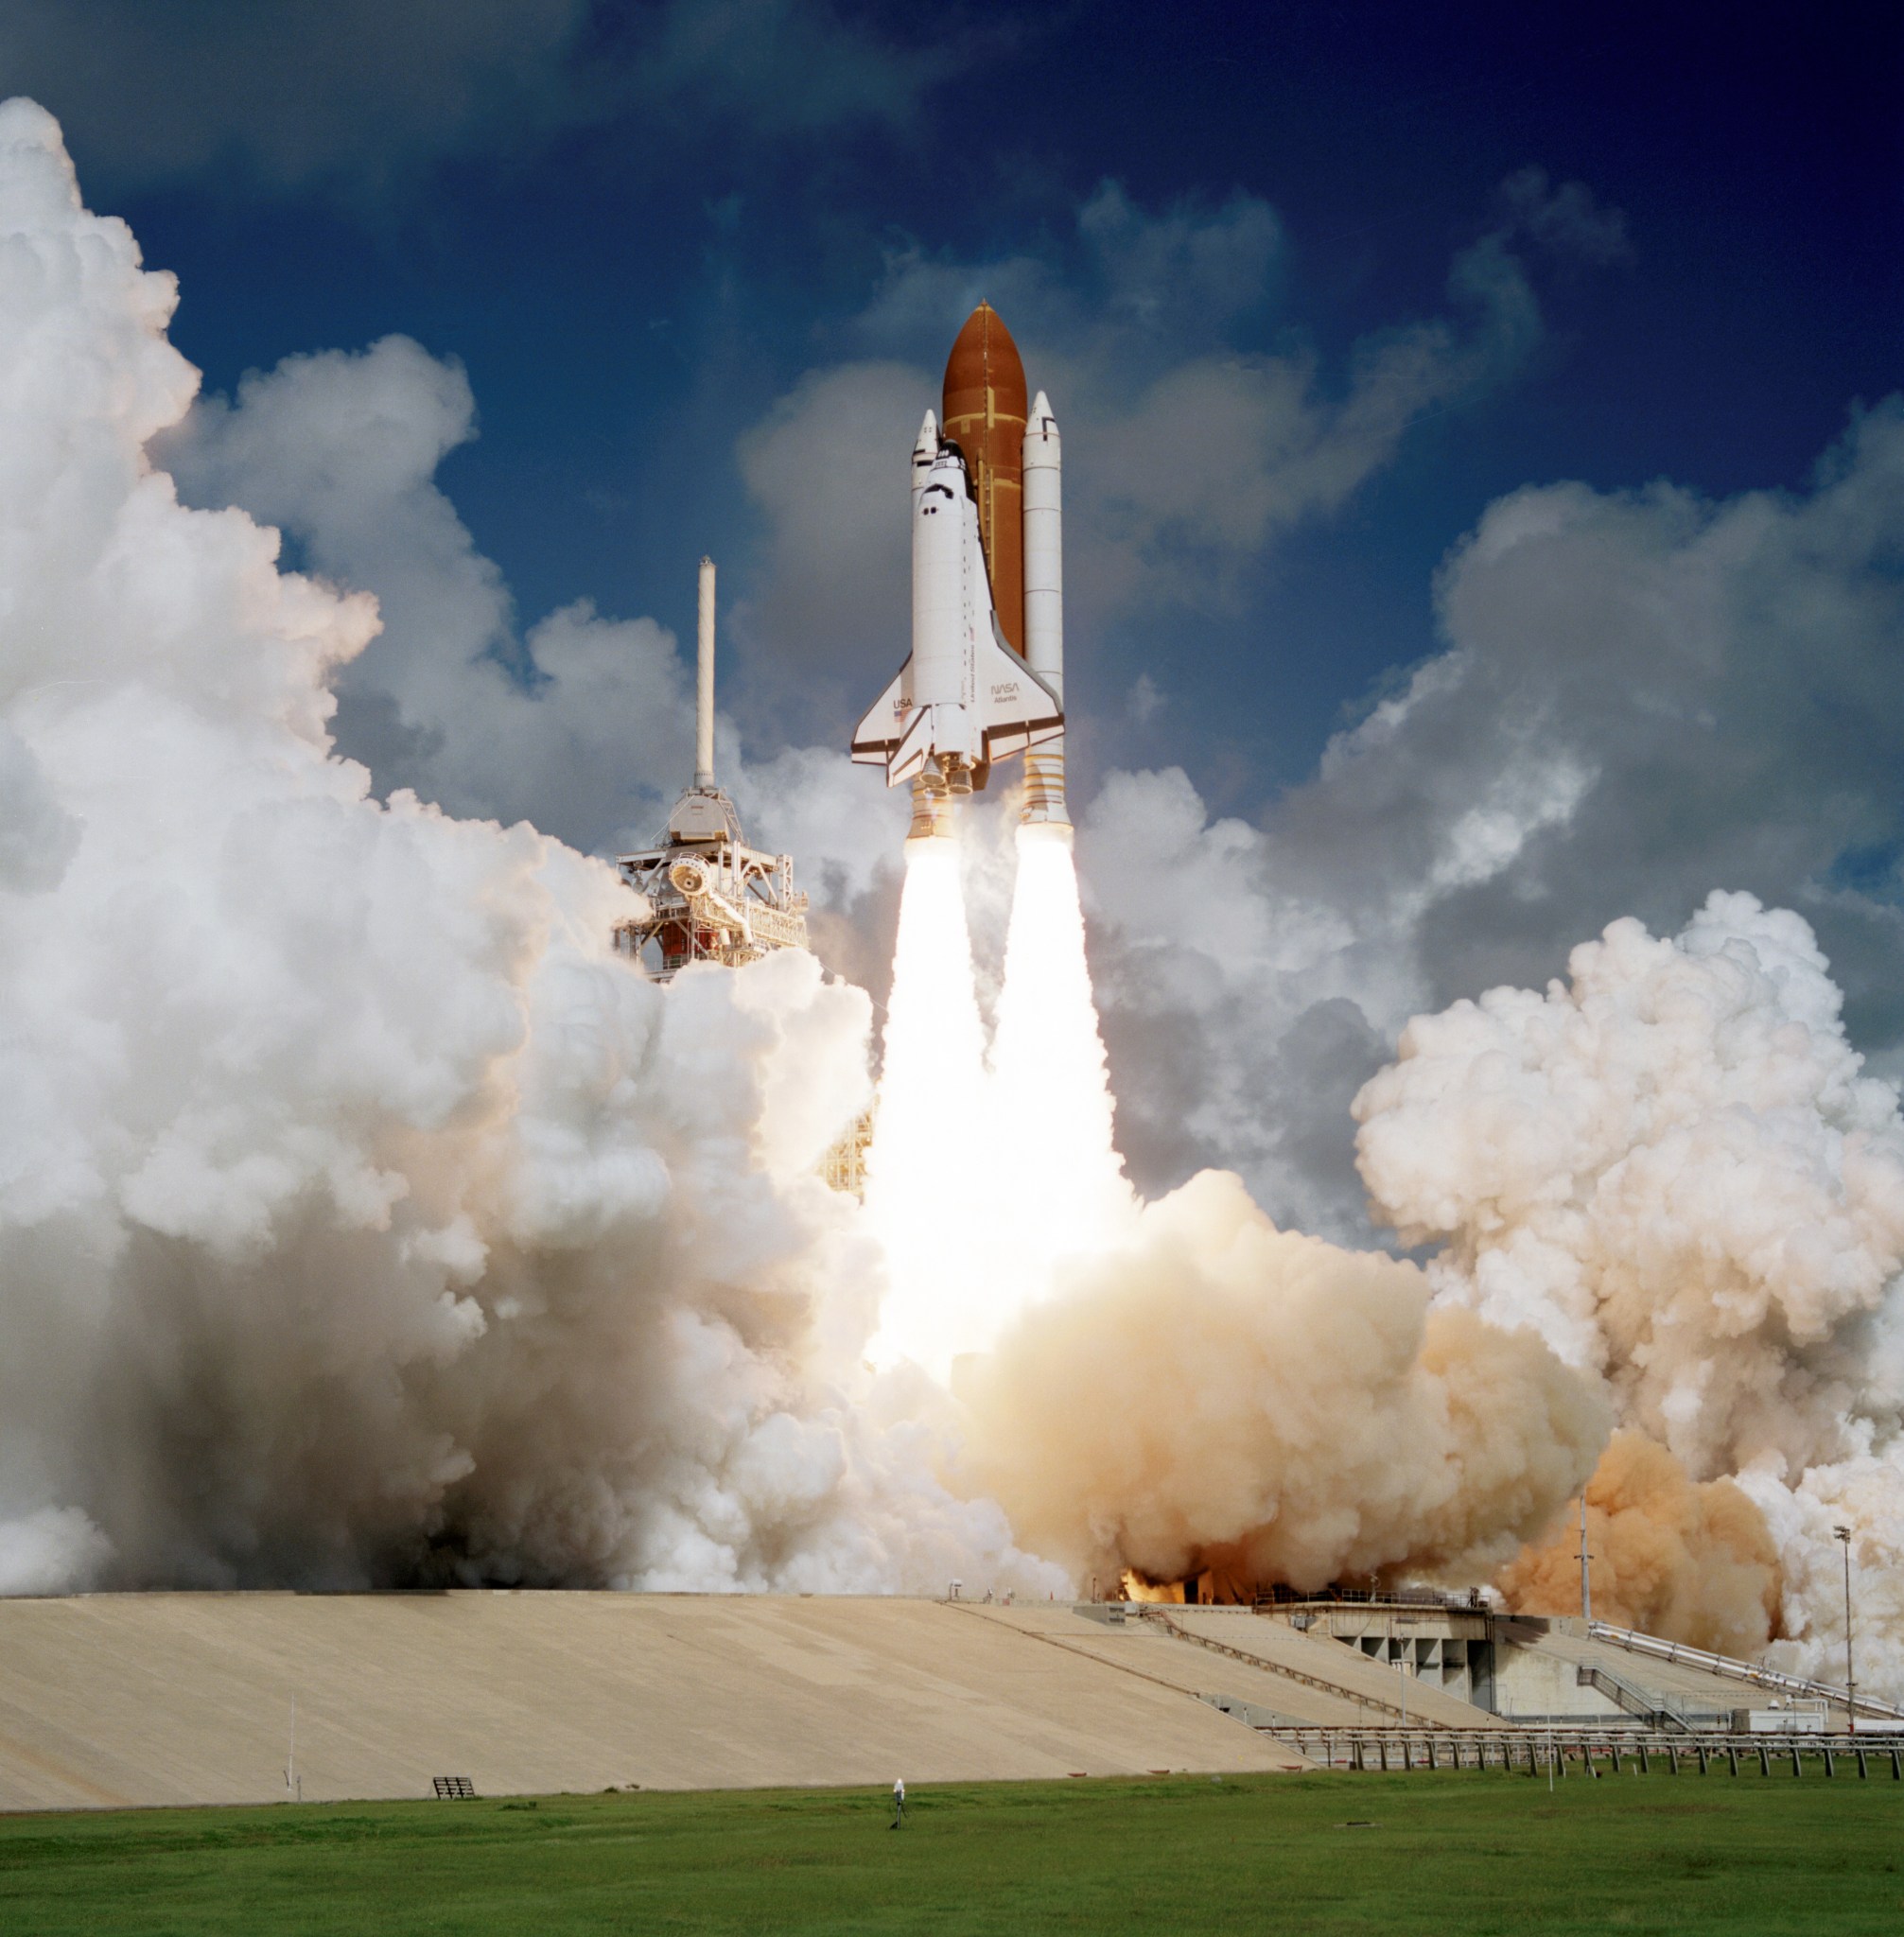 This week in 1985, space shuttle Atlantis, mission STS-51J, launched on its maiden voyage from NASA’s Kennedy Space Center. 